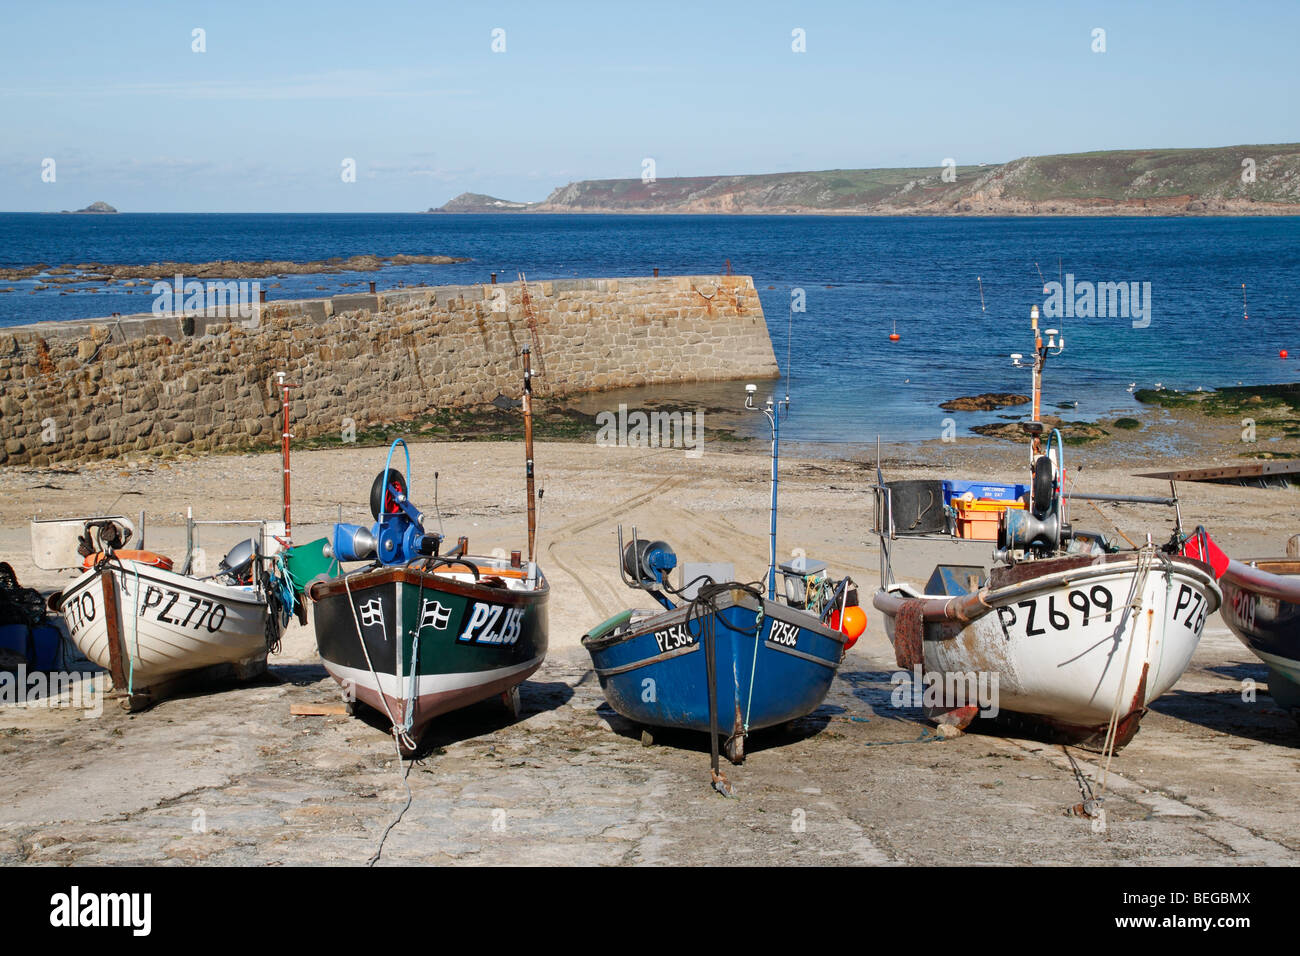 Cornish fishing boats in Sennen Cove harbour at low tide, Cornwall England UK. Stock Photo